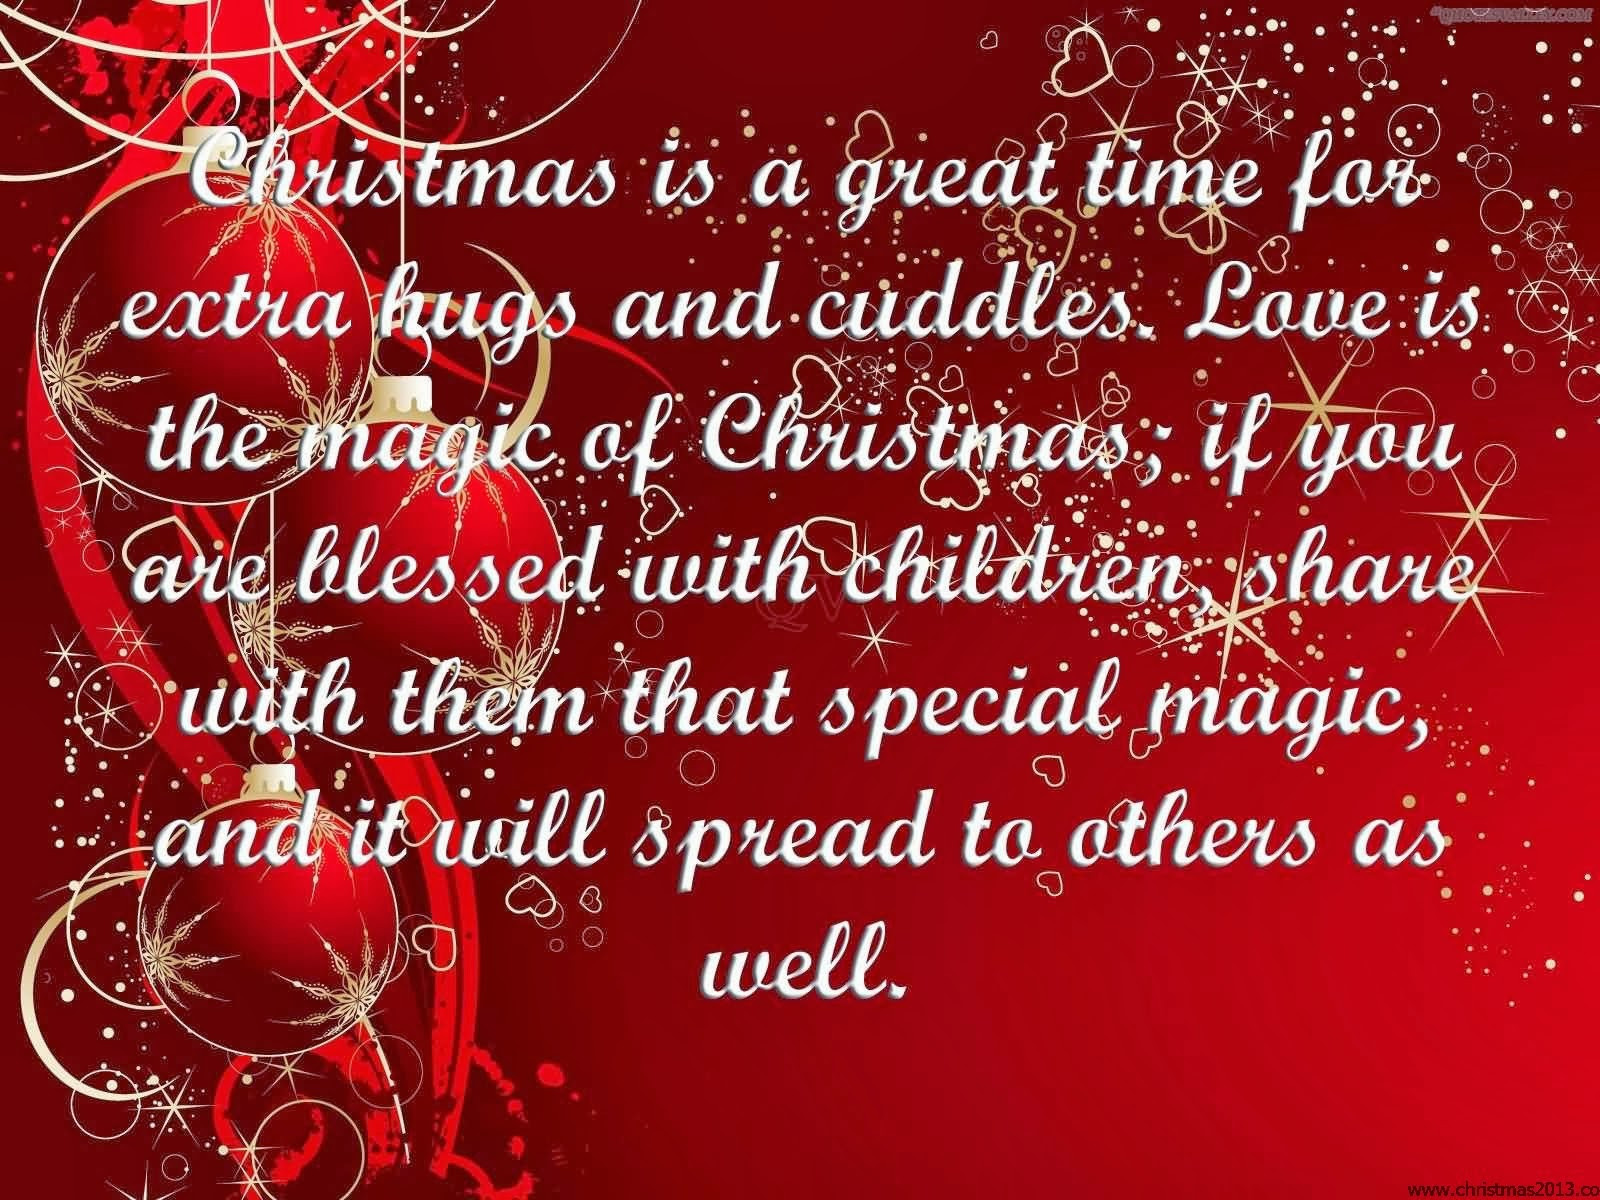 Keep Christ In Christmas Quotes
 Inspirational Christmas Quotes For Employees QuotesGram